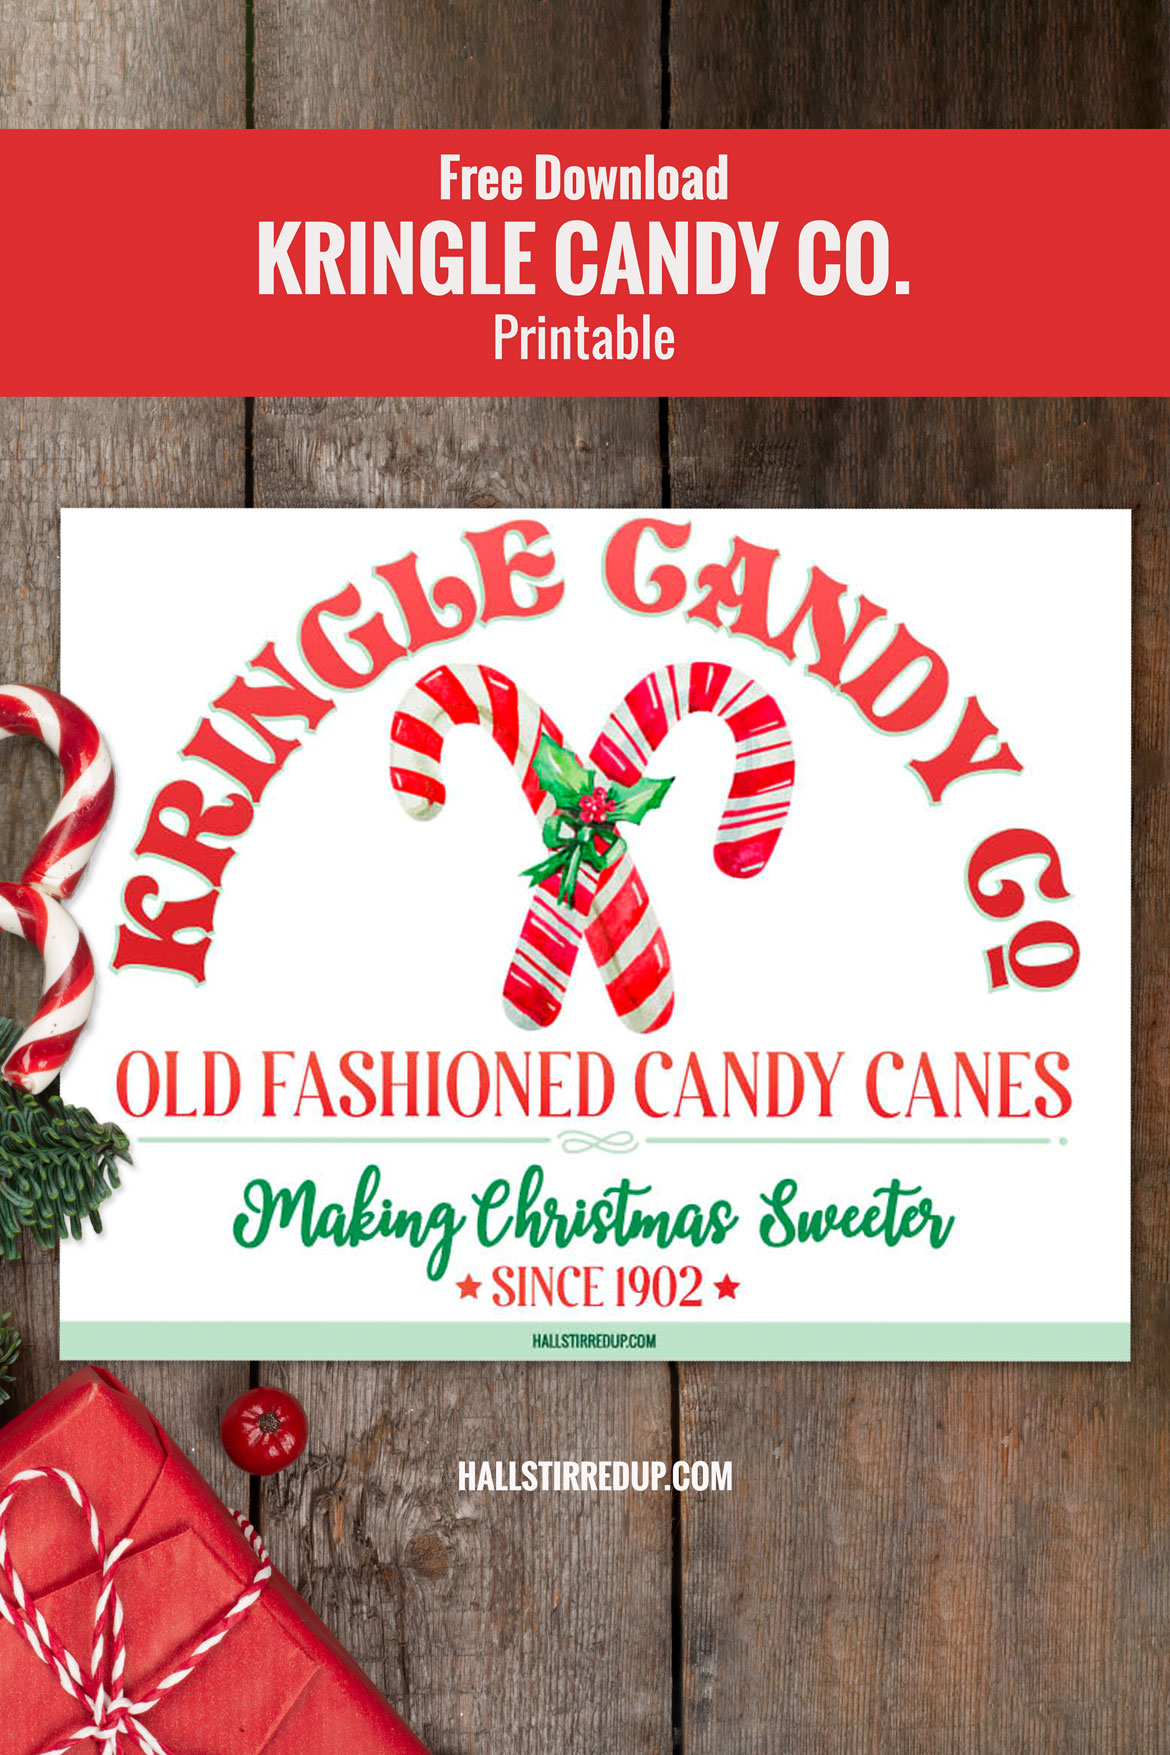 Share holiday fun with a free Kringle Candy Co. printable sign